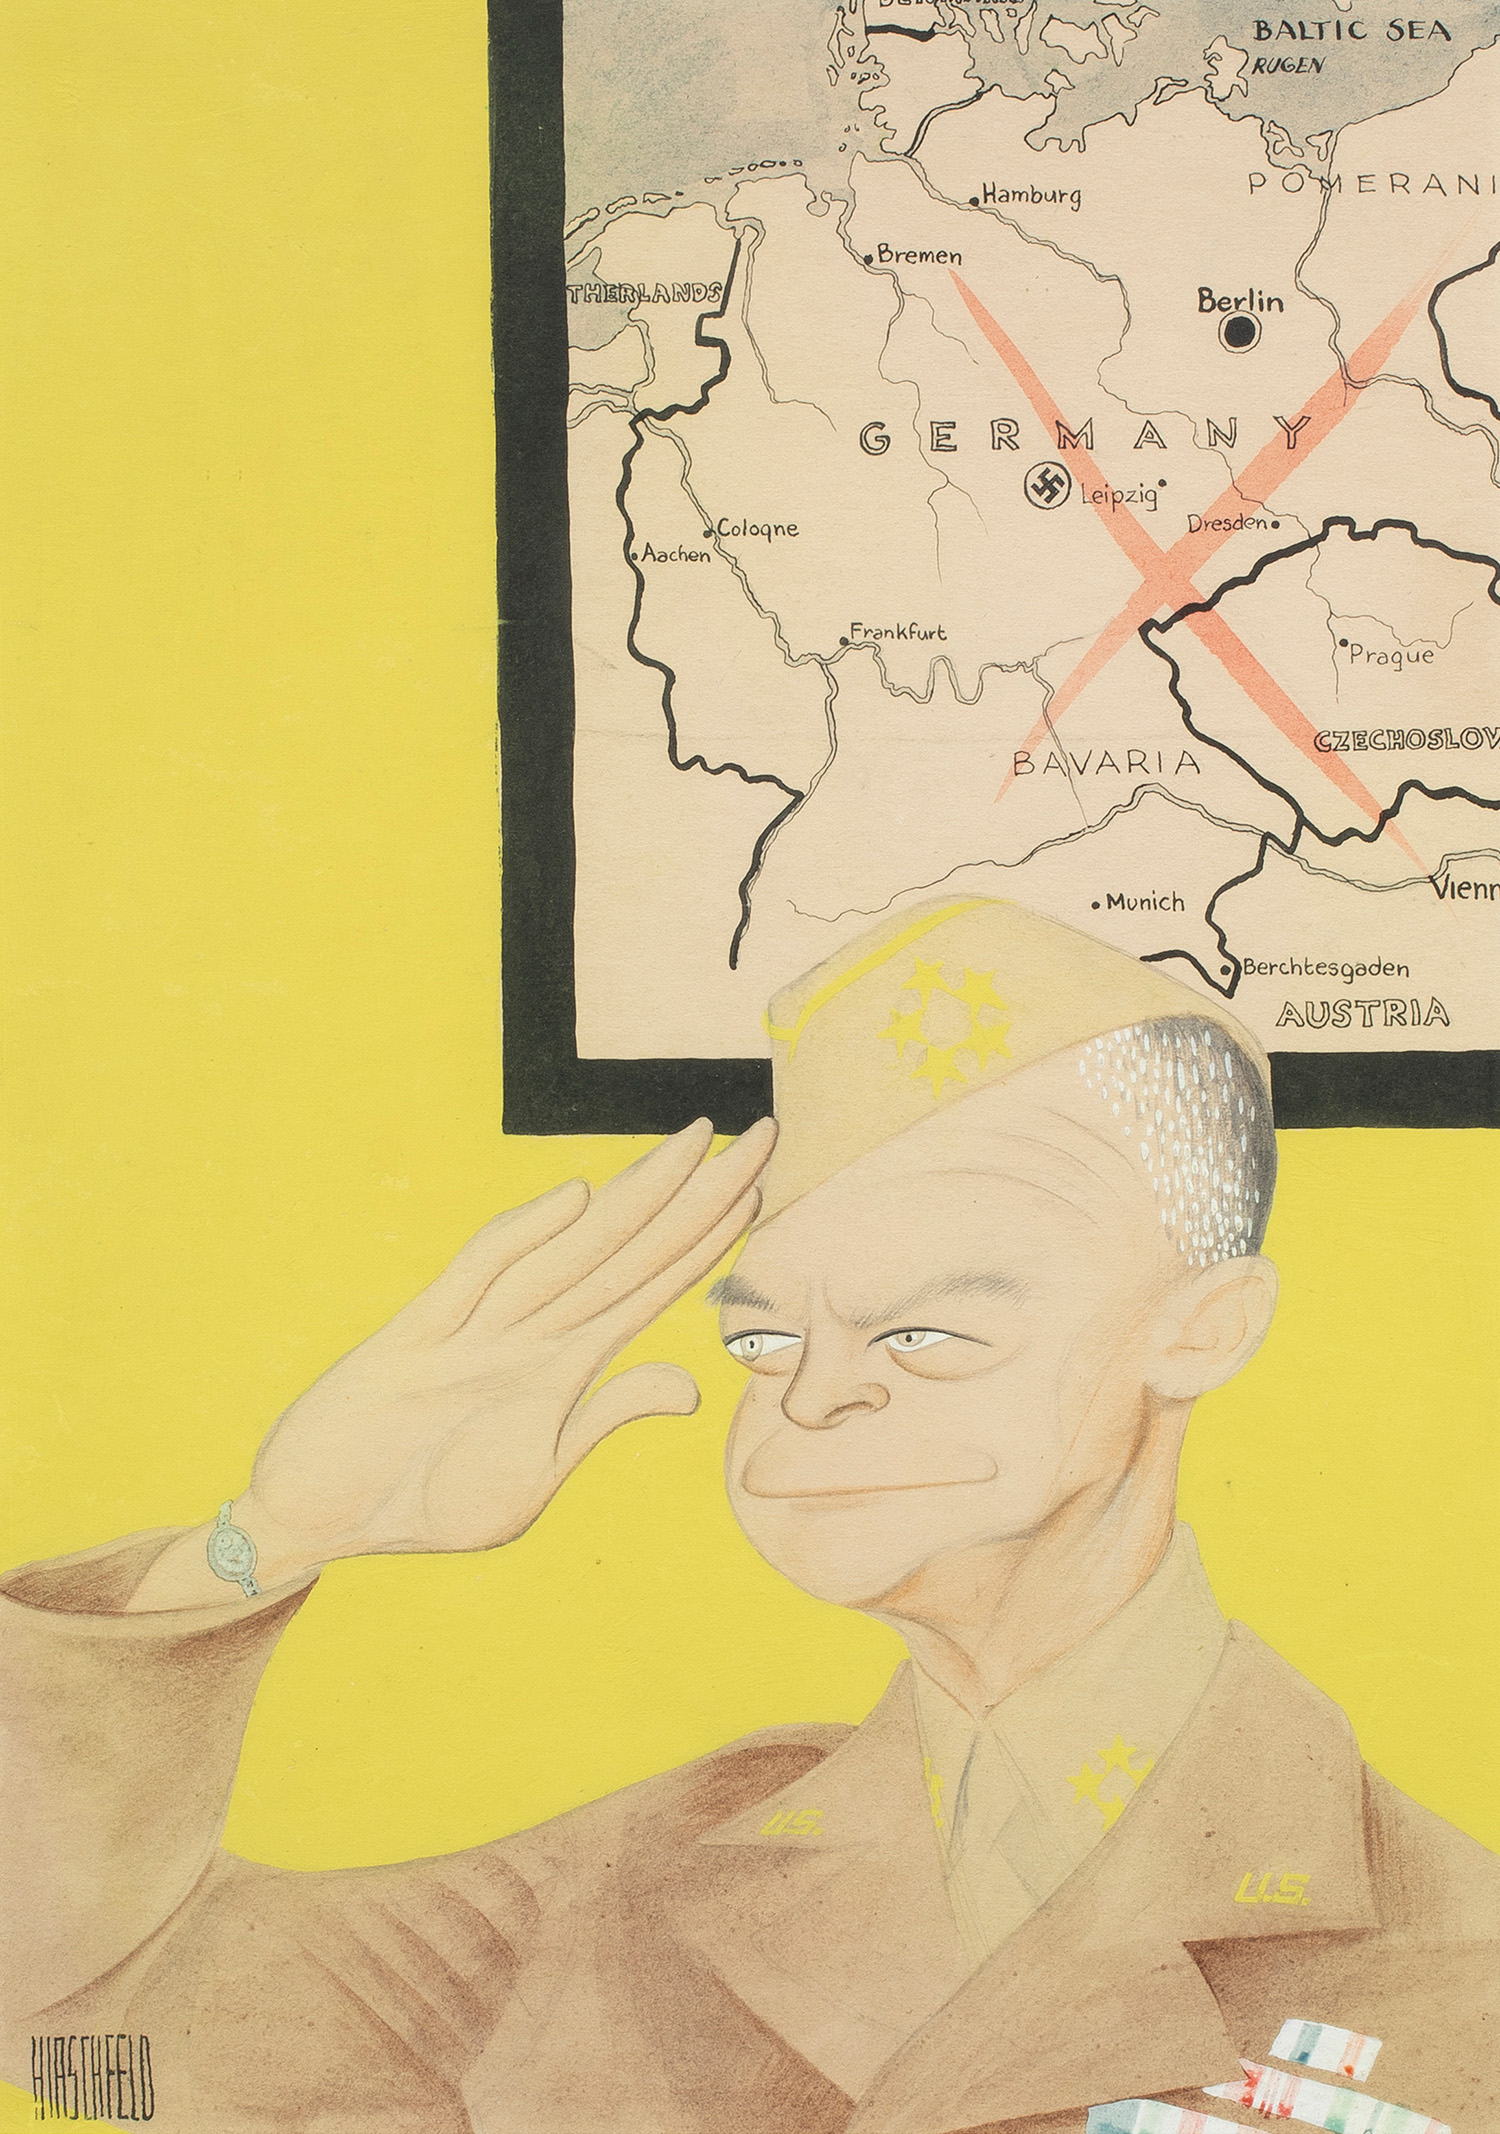 Al Hirschfeld (American, 1903–2003), General Dwight D. Eisenhower, 1945, gouache, pencil, and ink on paper, published for the cover of The American Mercury Magazine, July 1, 1945, 15.25″ x 10.75″.